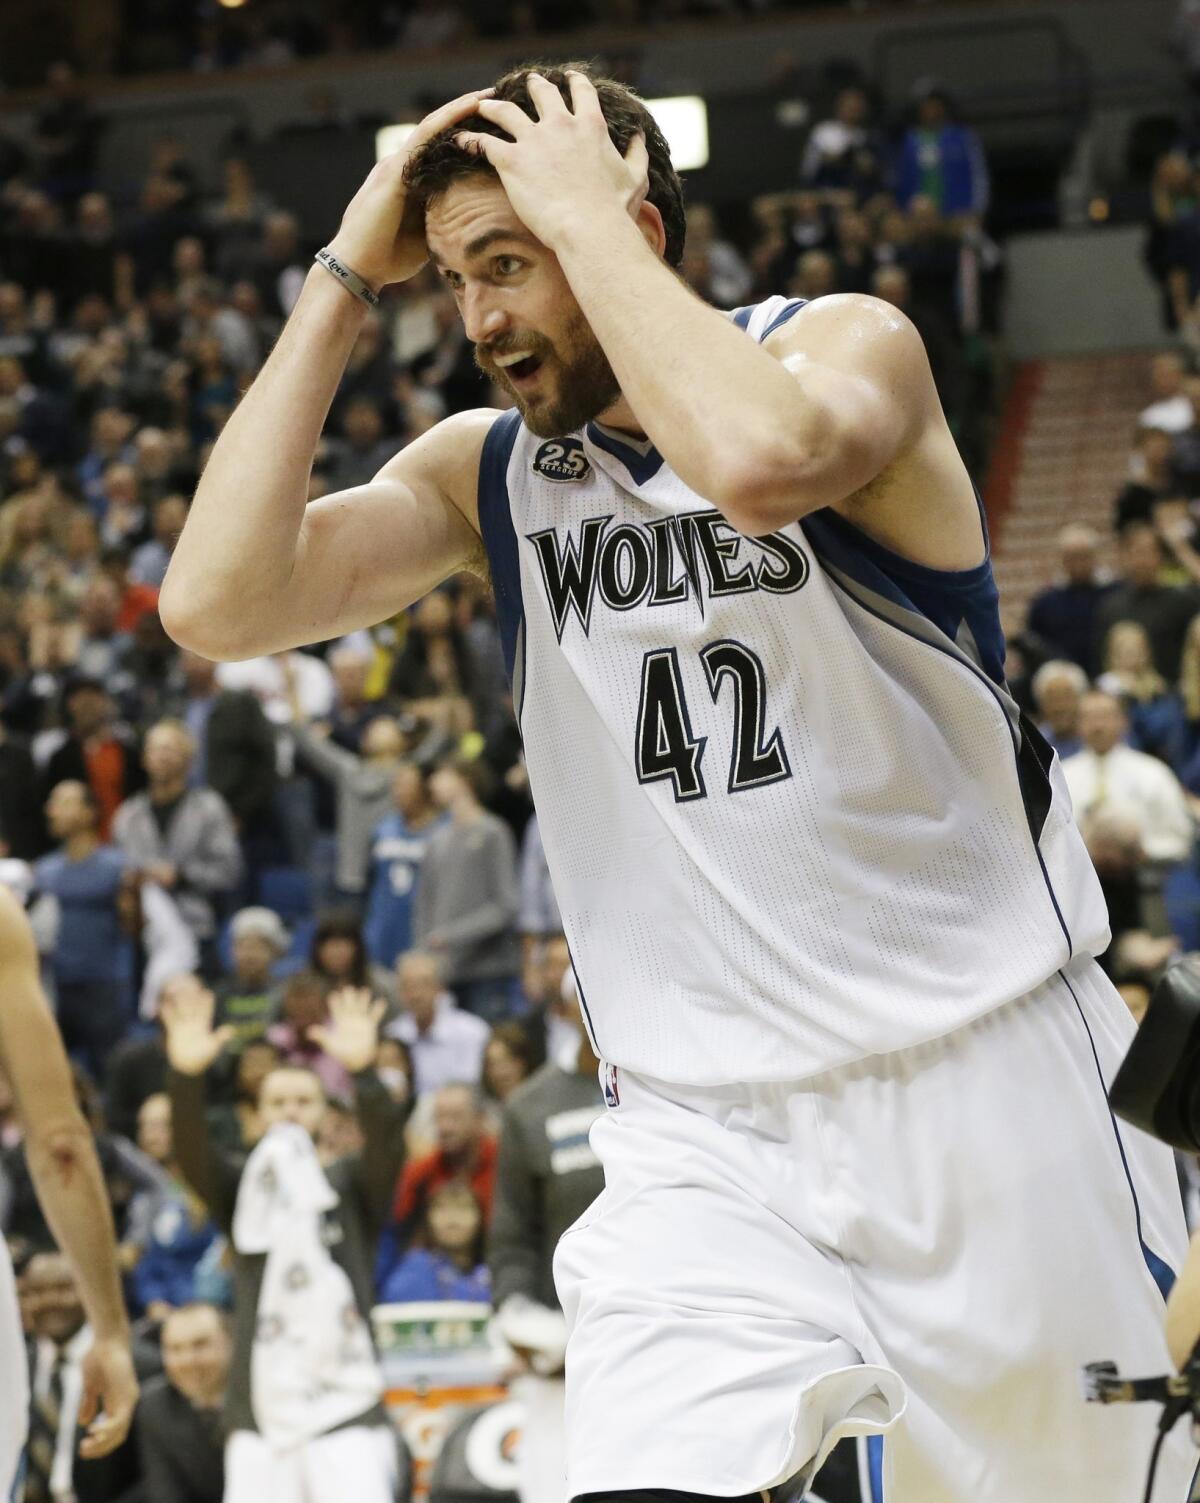 Minnesota's Kevin Love reacts in disbelief as he's called for a foul in overtime during the Timberwolves' 120-115 win over the Oklahoma City Thunder on Friday.